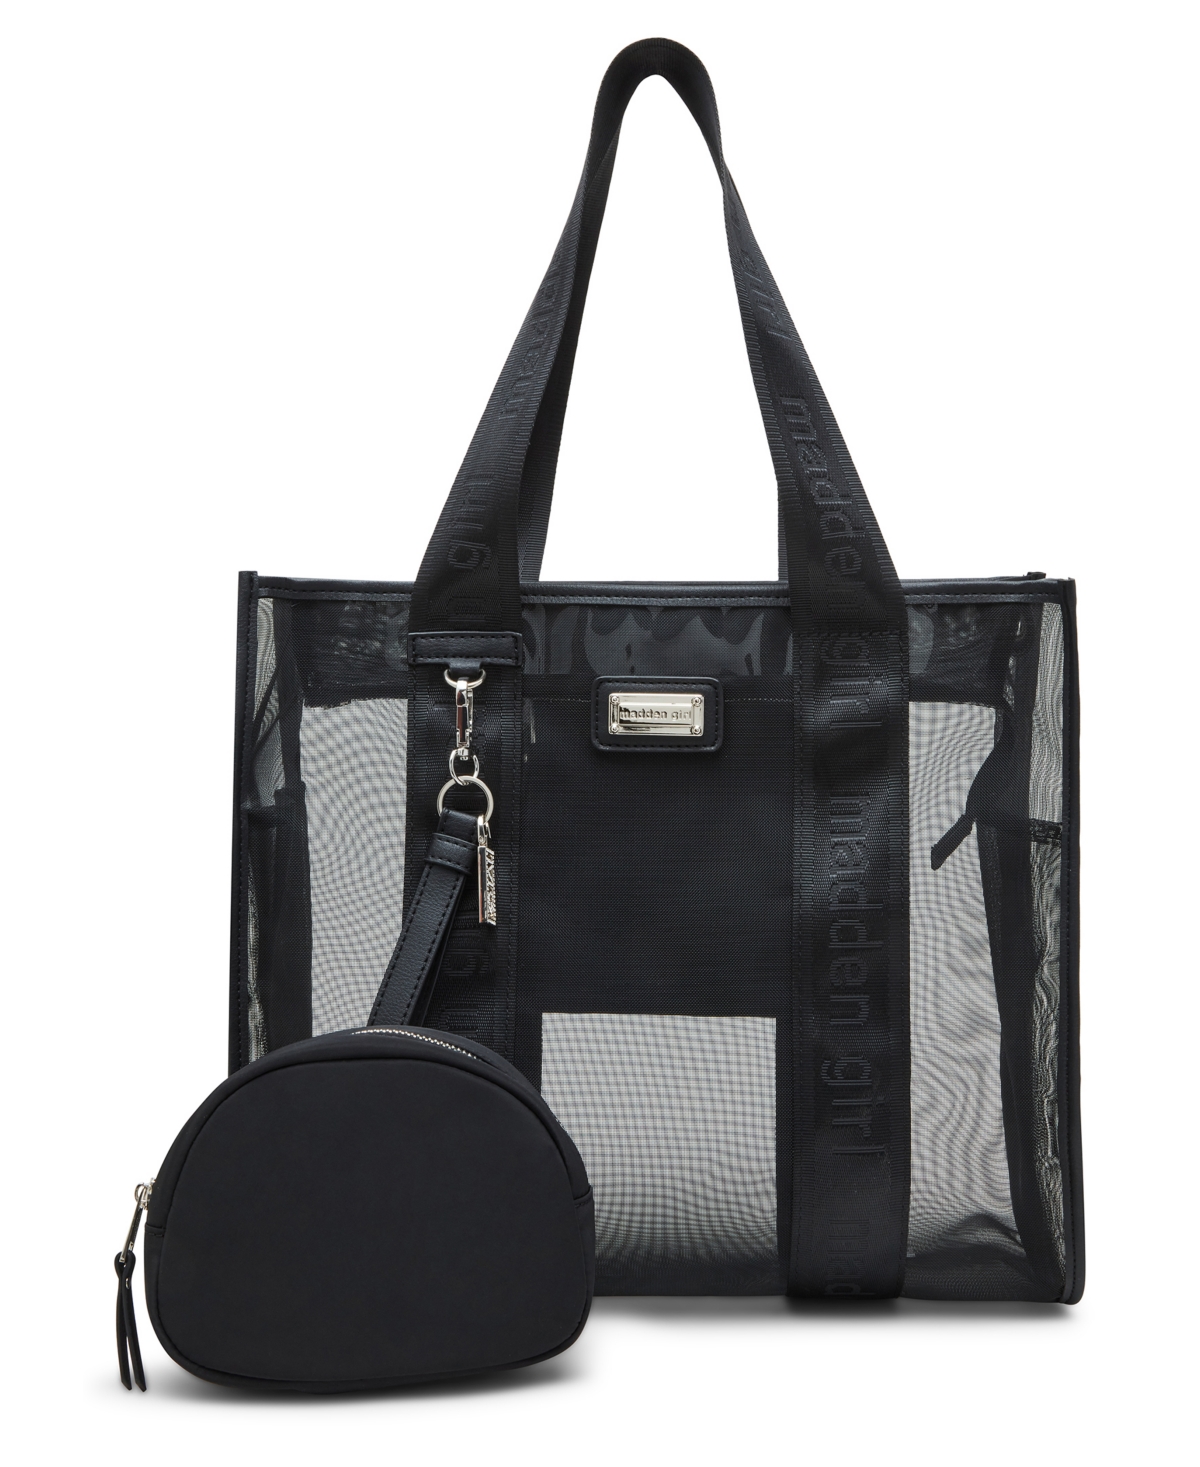 Madden Girl Poppy Mesh Tote With Nylon Pouch In Black